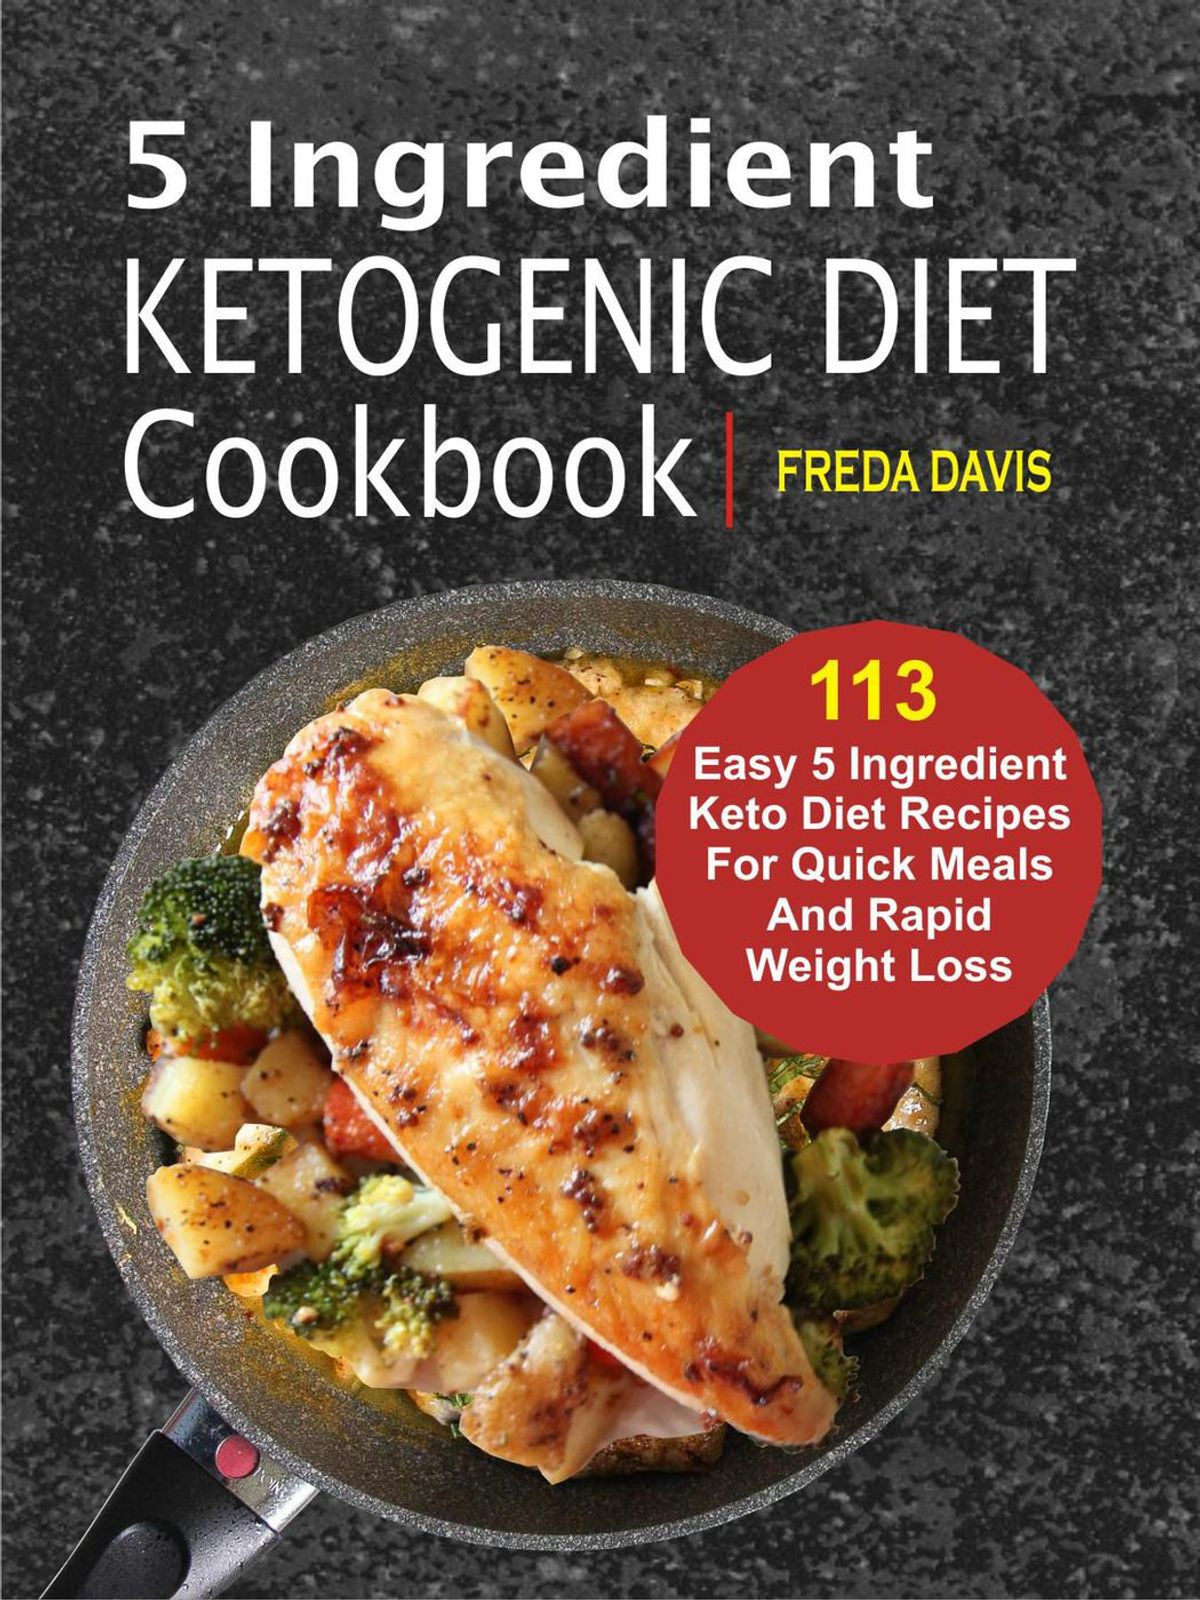 Quick Weight Loss Diet Recipes
 5 Ingre nt Ketogenic Diet Cookbook 113 Easy 5